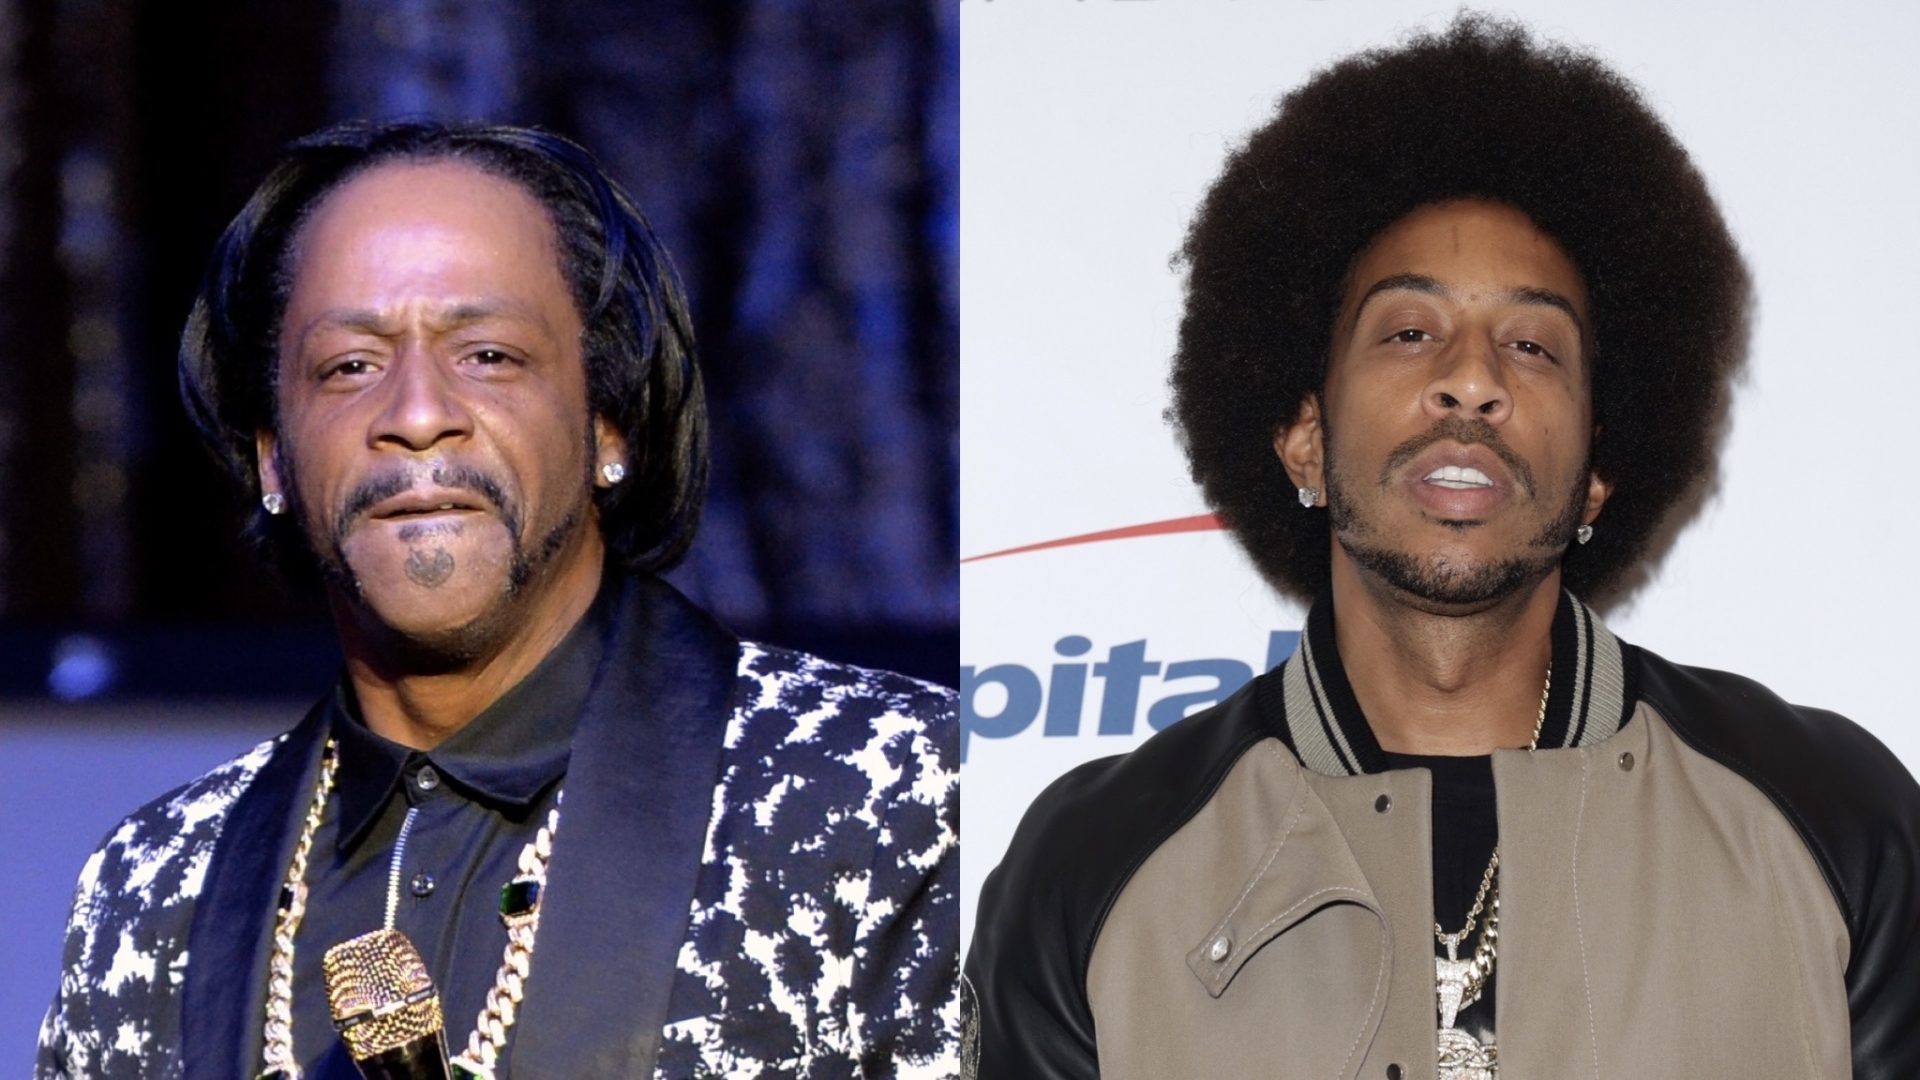 Oop! Katt Williams Fires Back At Ludacris' Freestyle With His Own Bars (LISTEN)